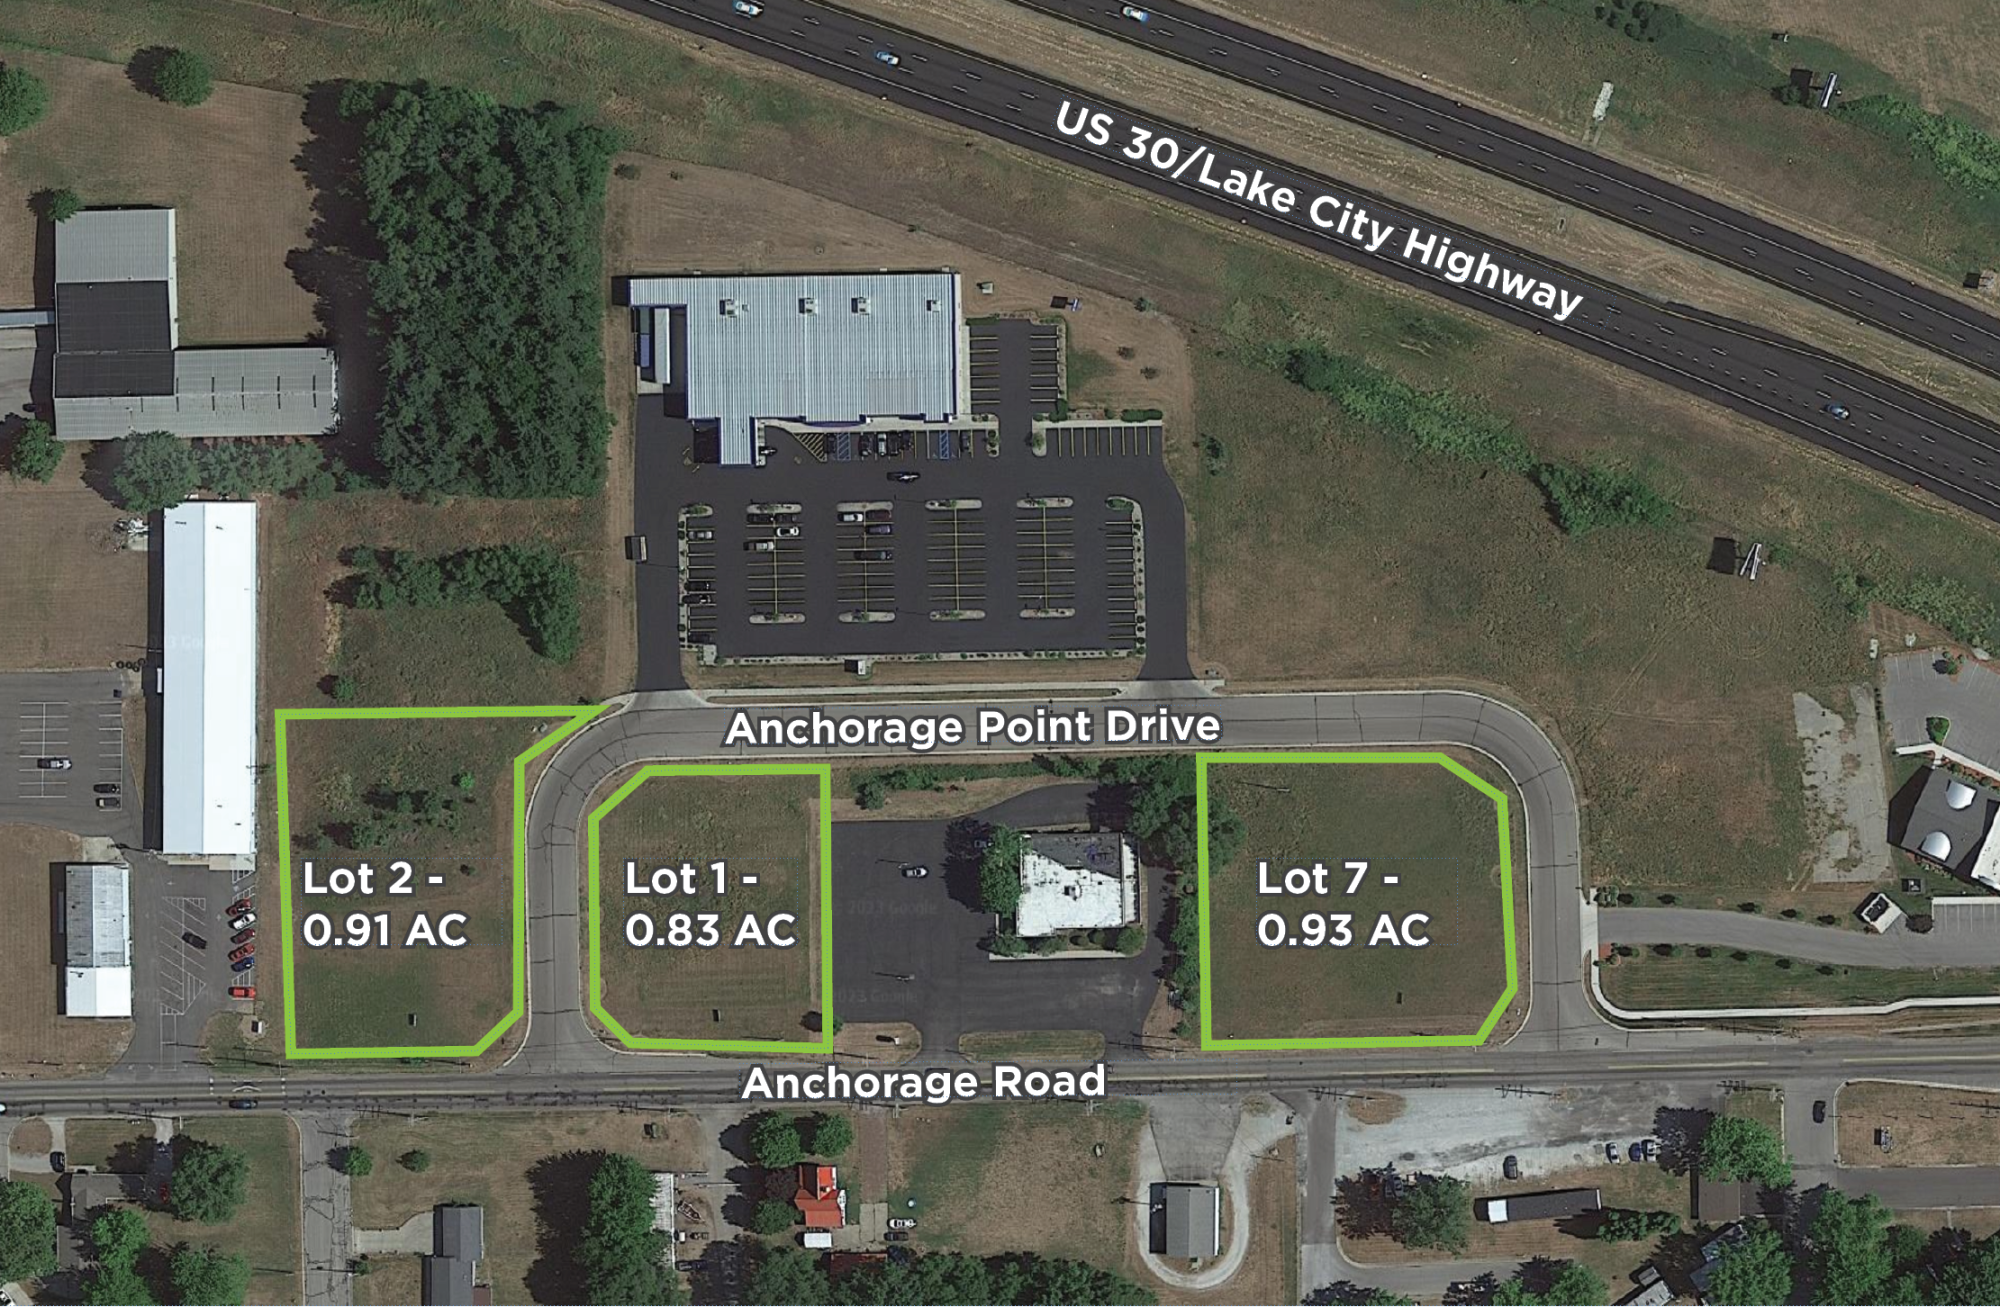 Sturges Property Group - US 30 & Anchorage Road Land in Warsaw Indiana Land For Sale